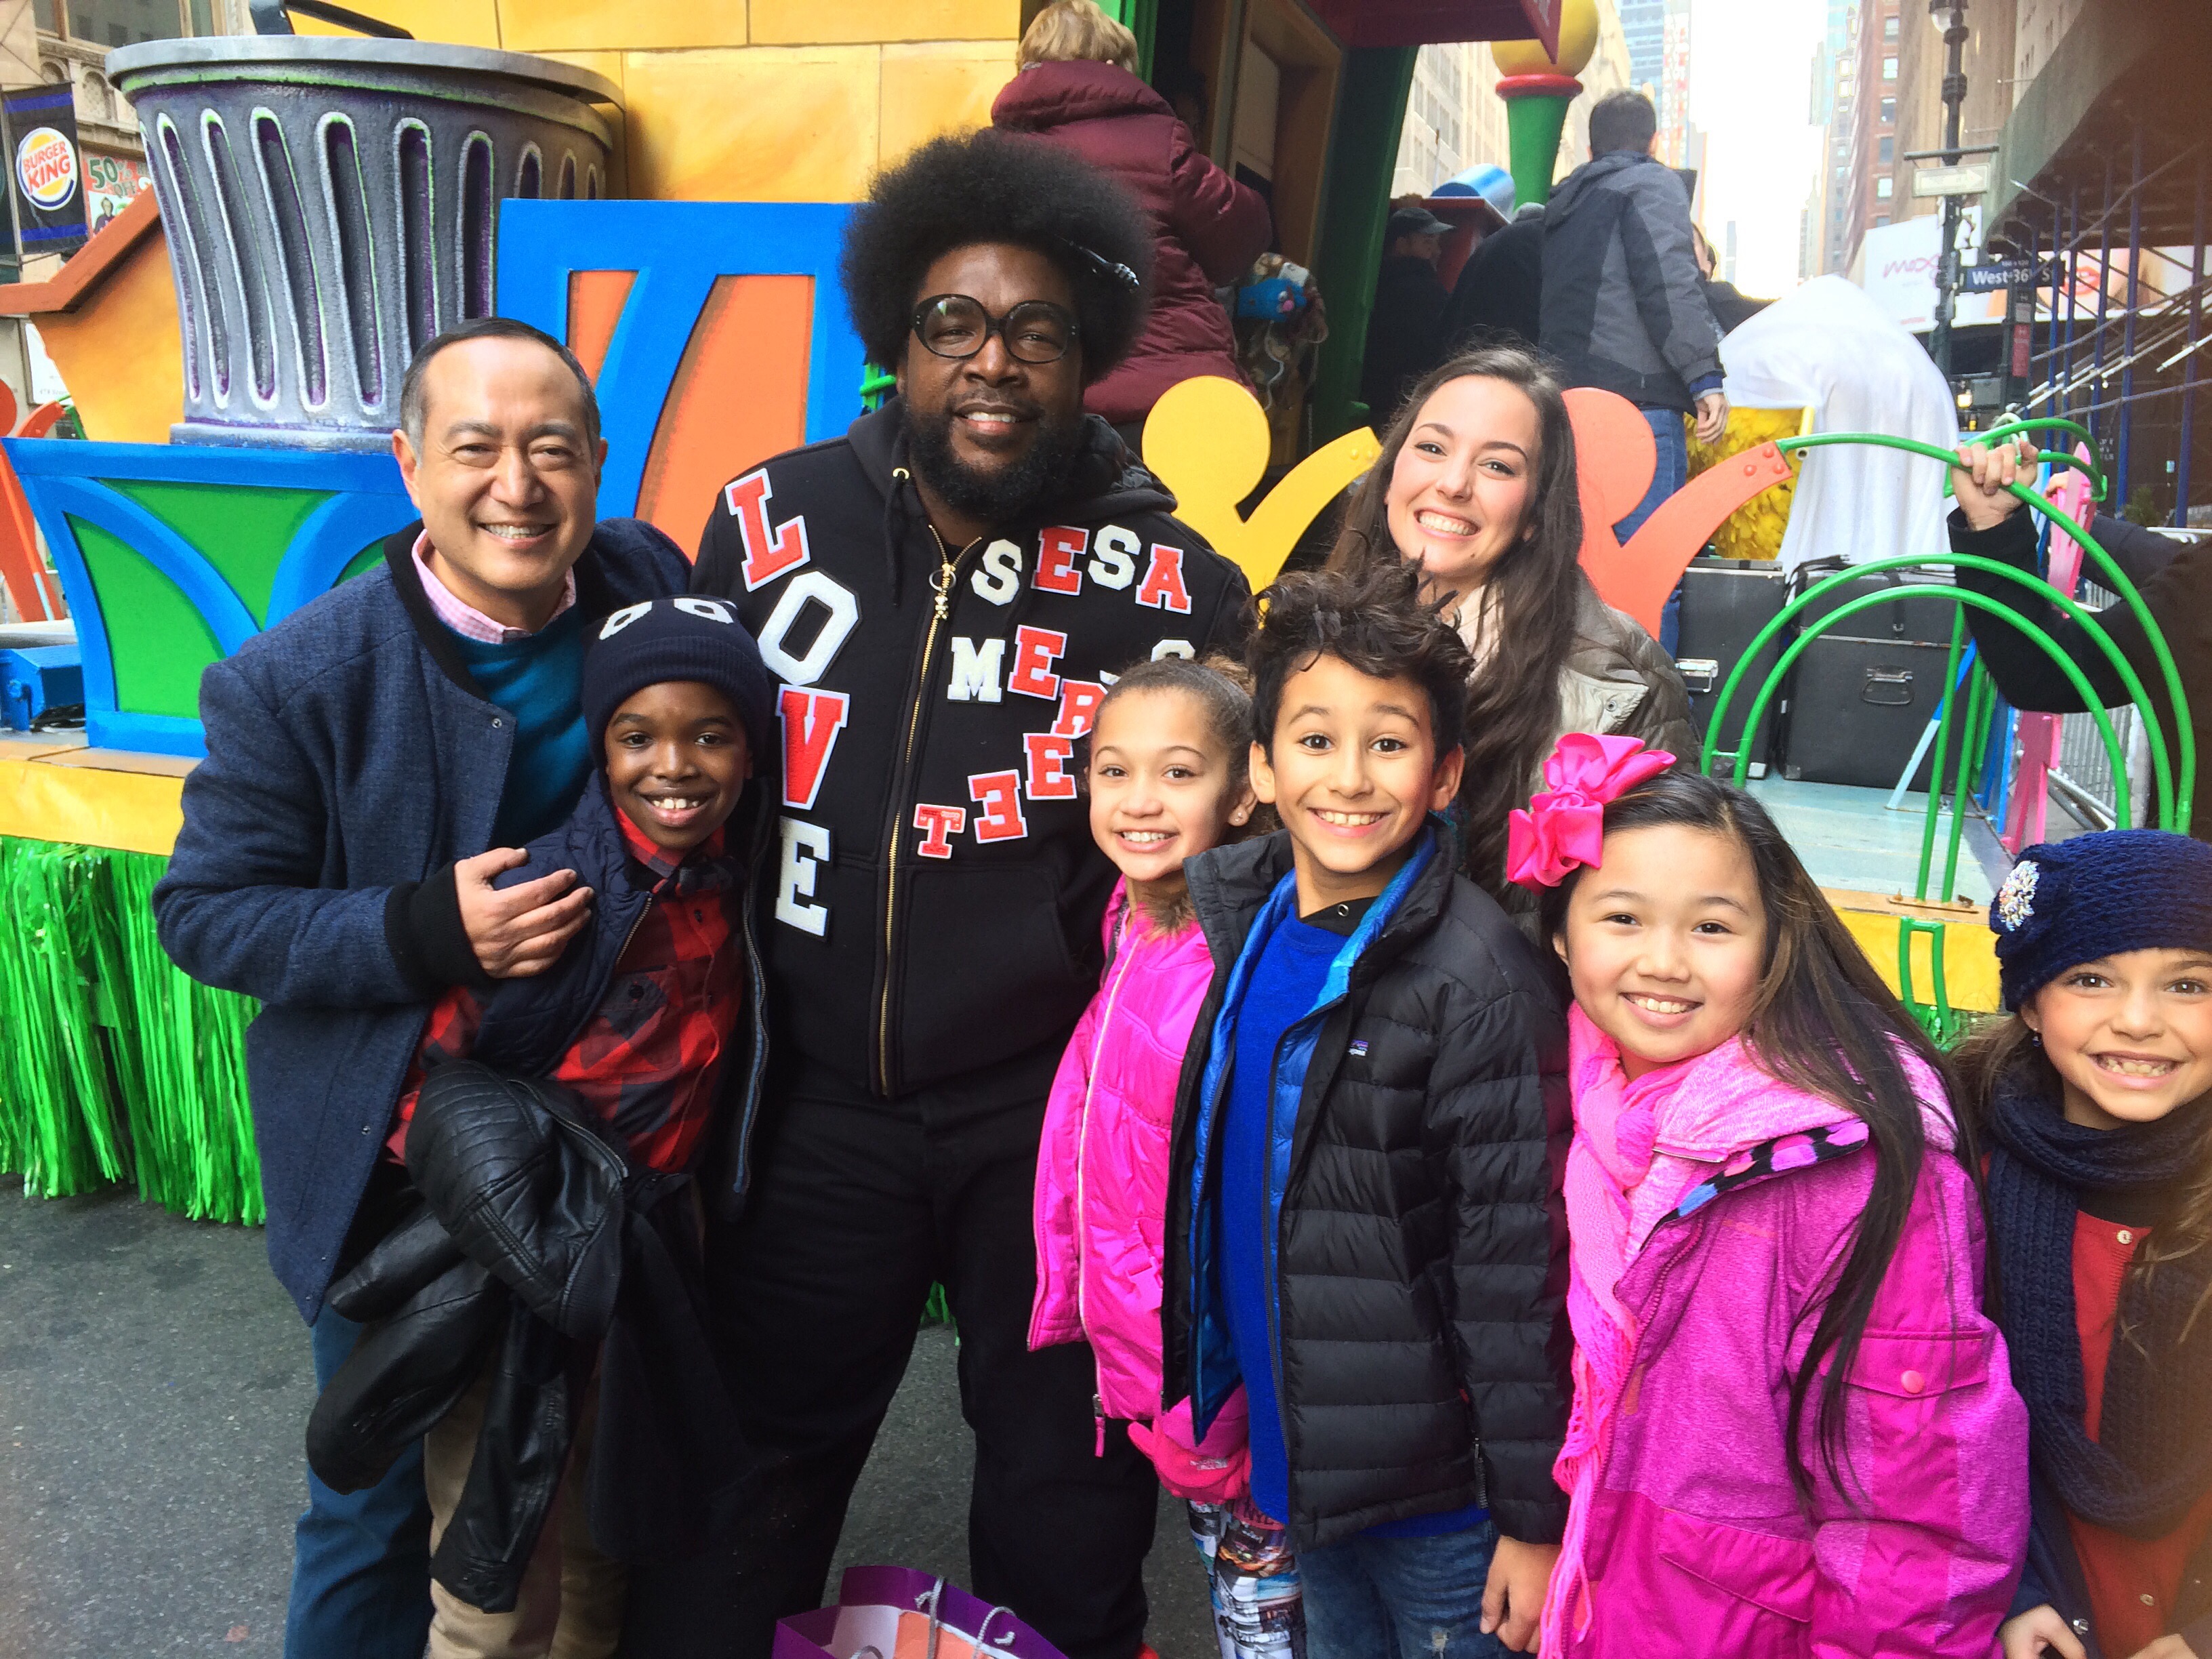 Alan Muraoka, Questlove, Suki Lopez, fellow child performers & RAINA CHENG pose for pics before boarding on the Sesame Street Float at the 89th Macy's Thanksgiving Day Parade, 11/26/2015